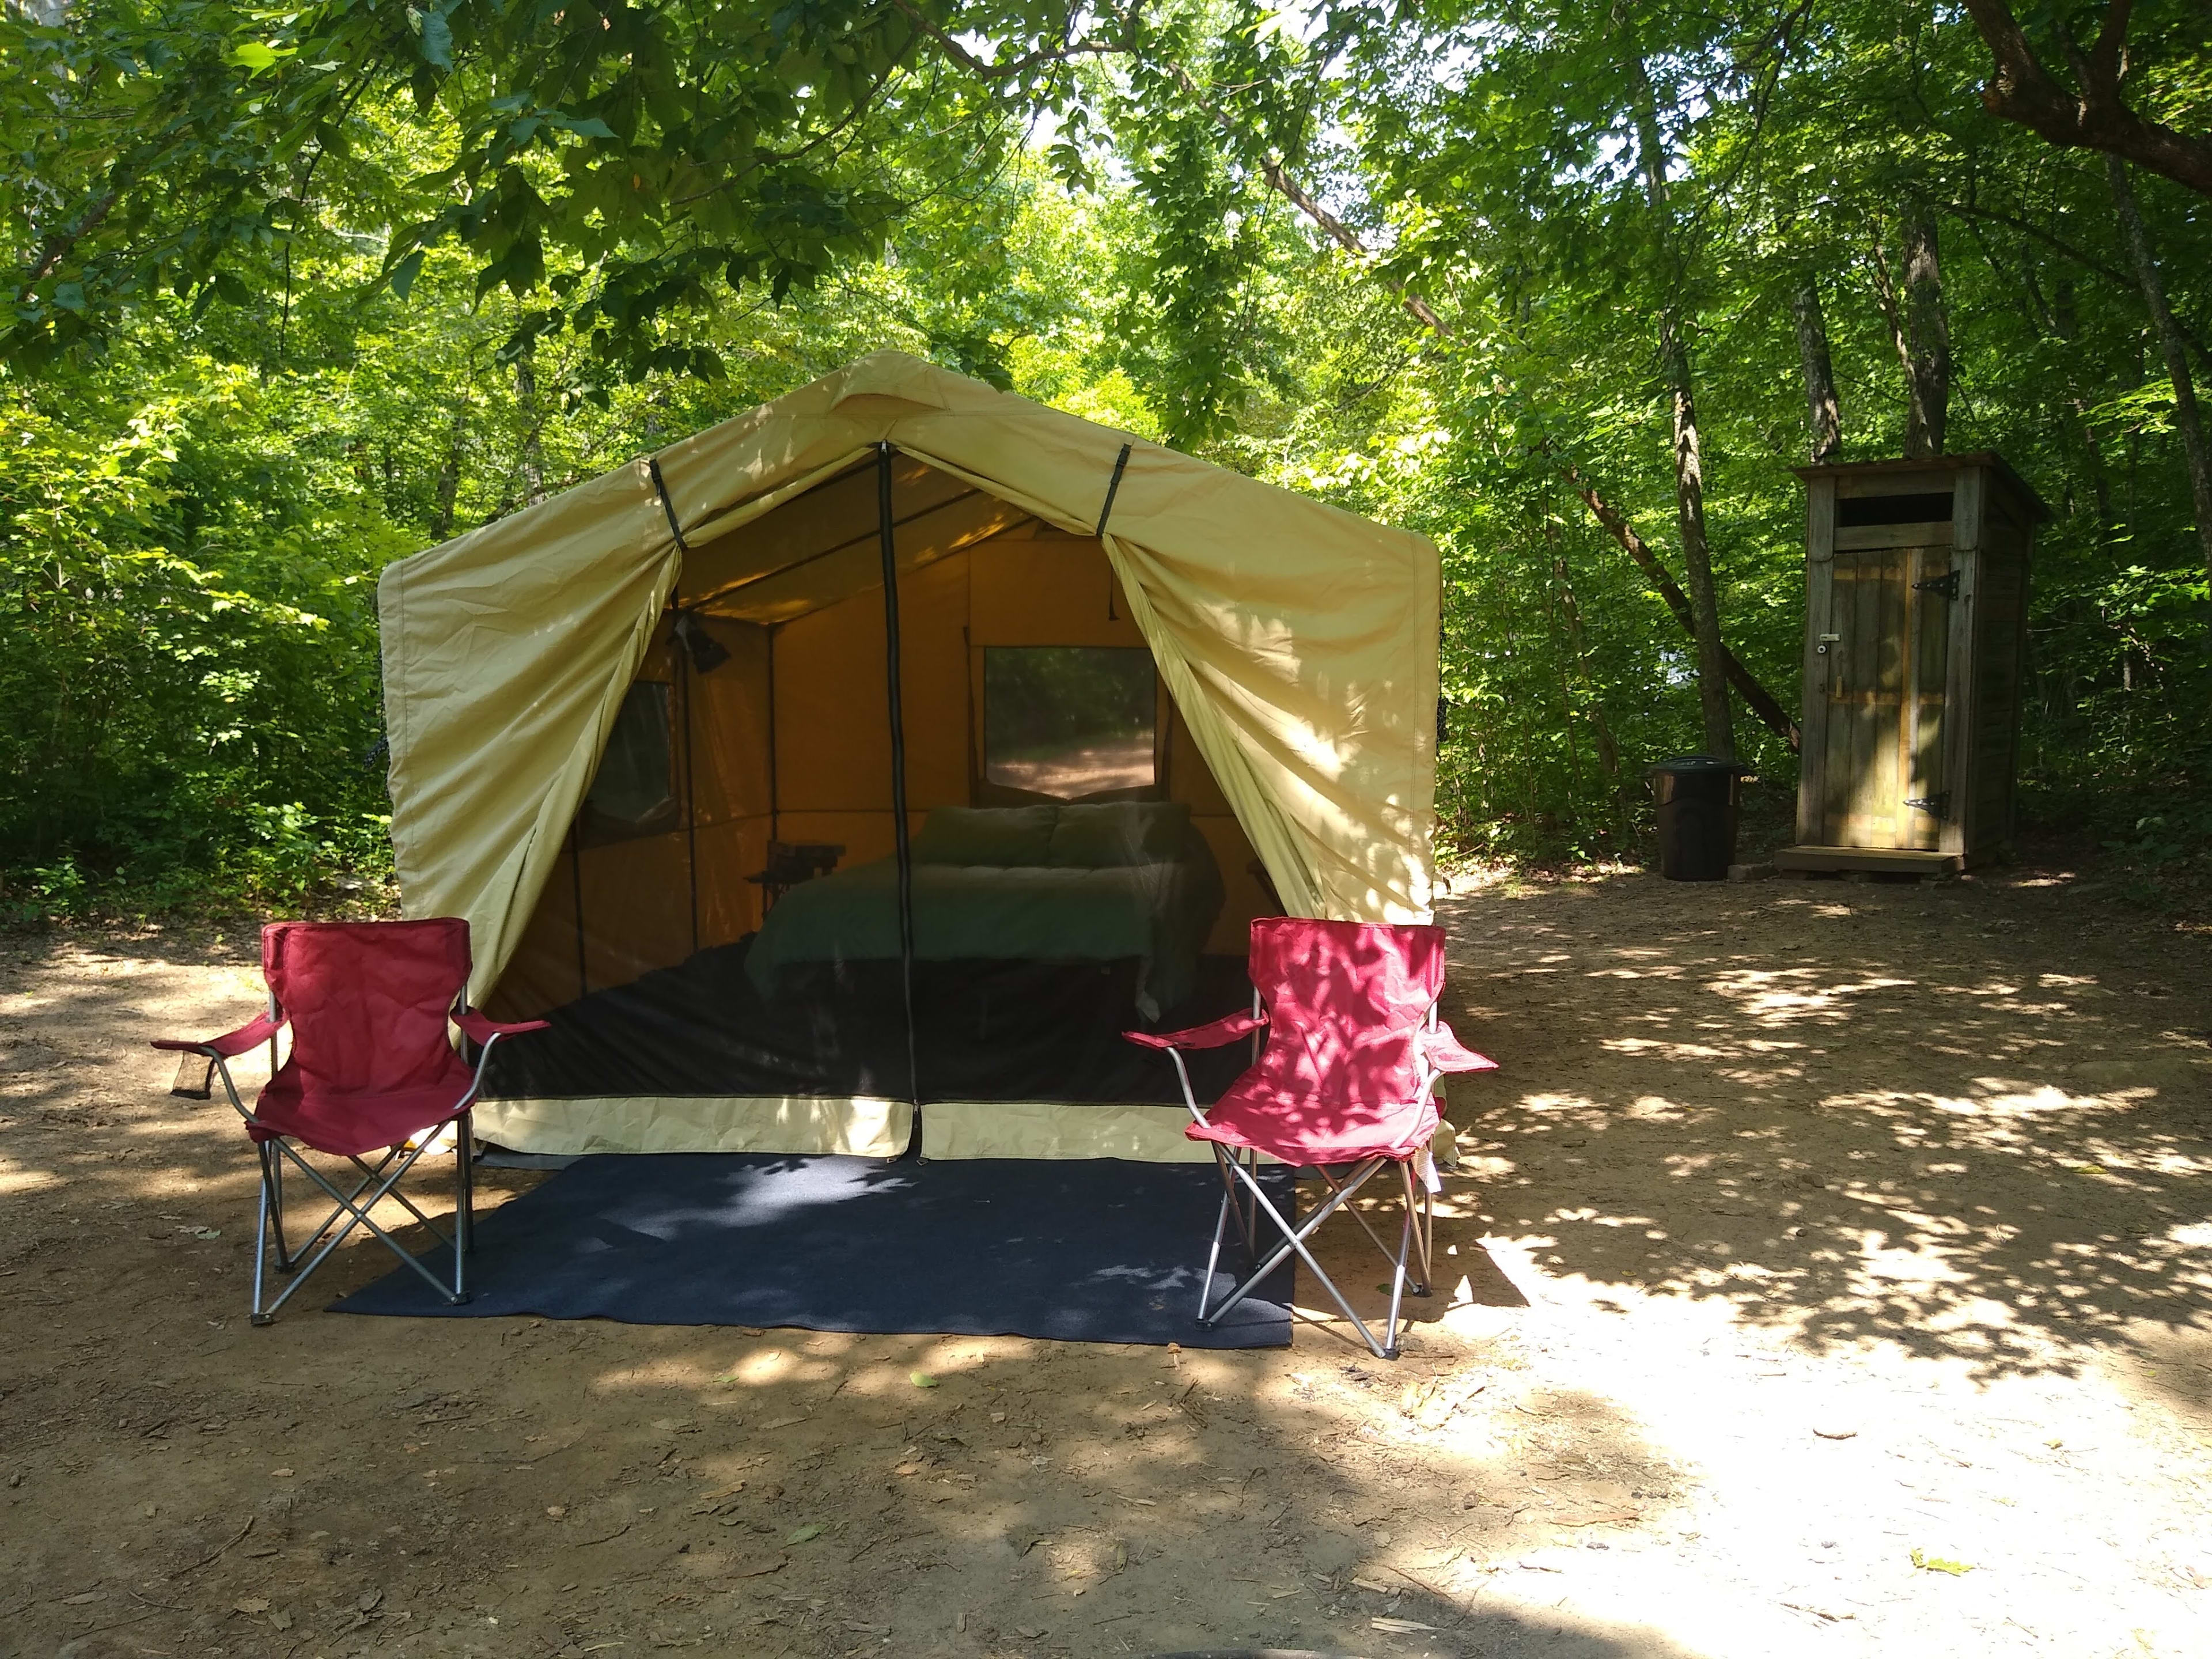 The glamping tent